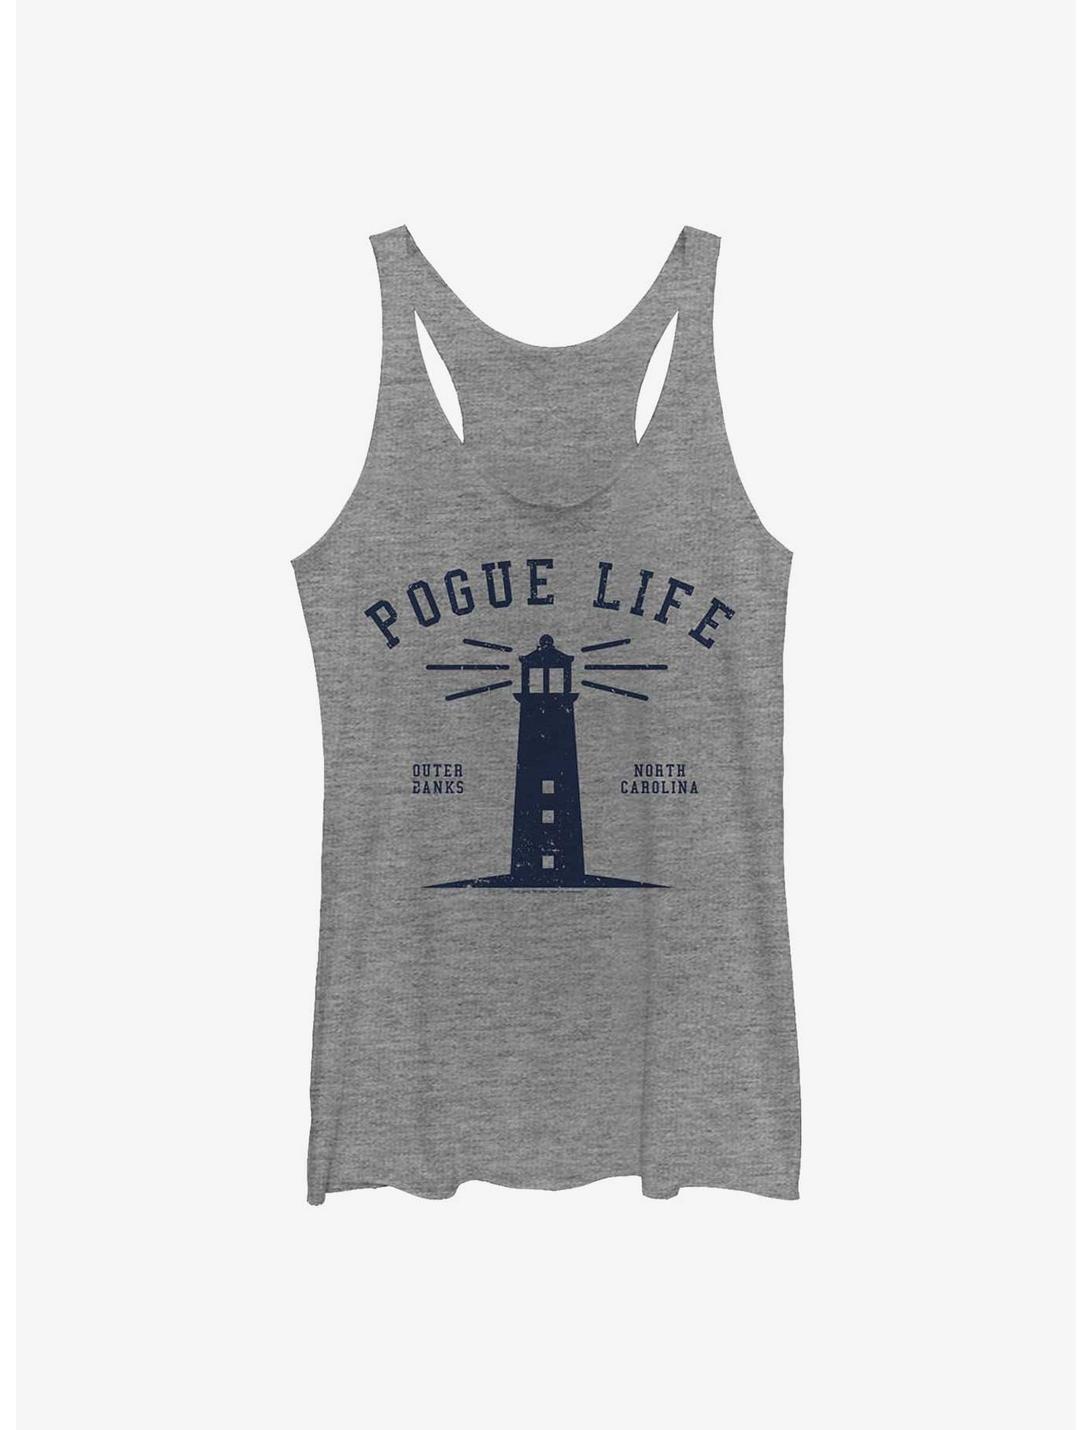 Outer Banks Lighthouse Pogue Life Womens Tank Top, GRAY HTR, hi-res